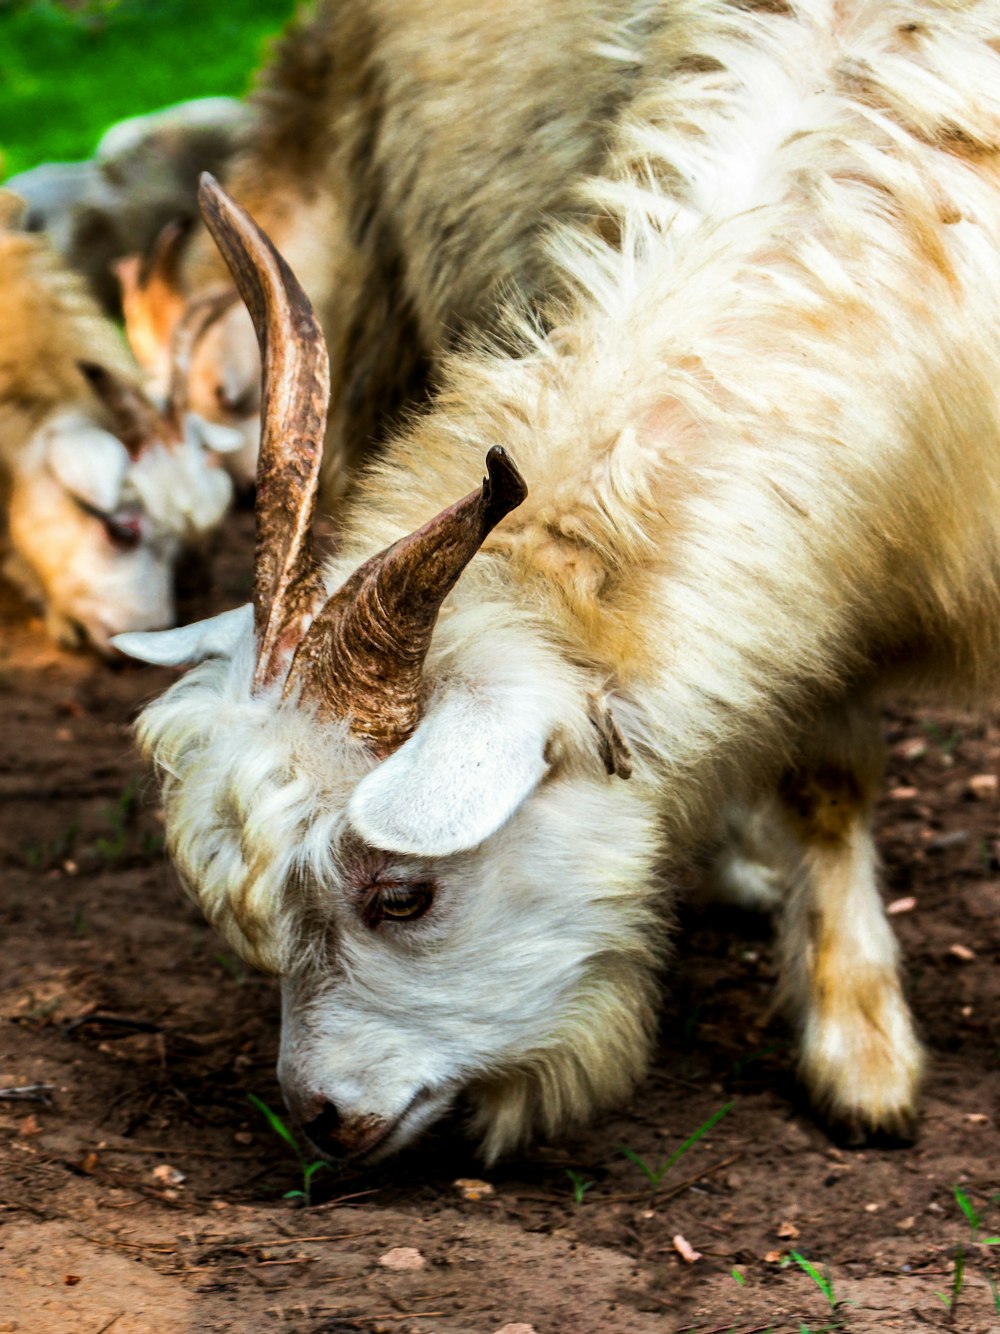 a goat with horns grazing in the dirt